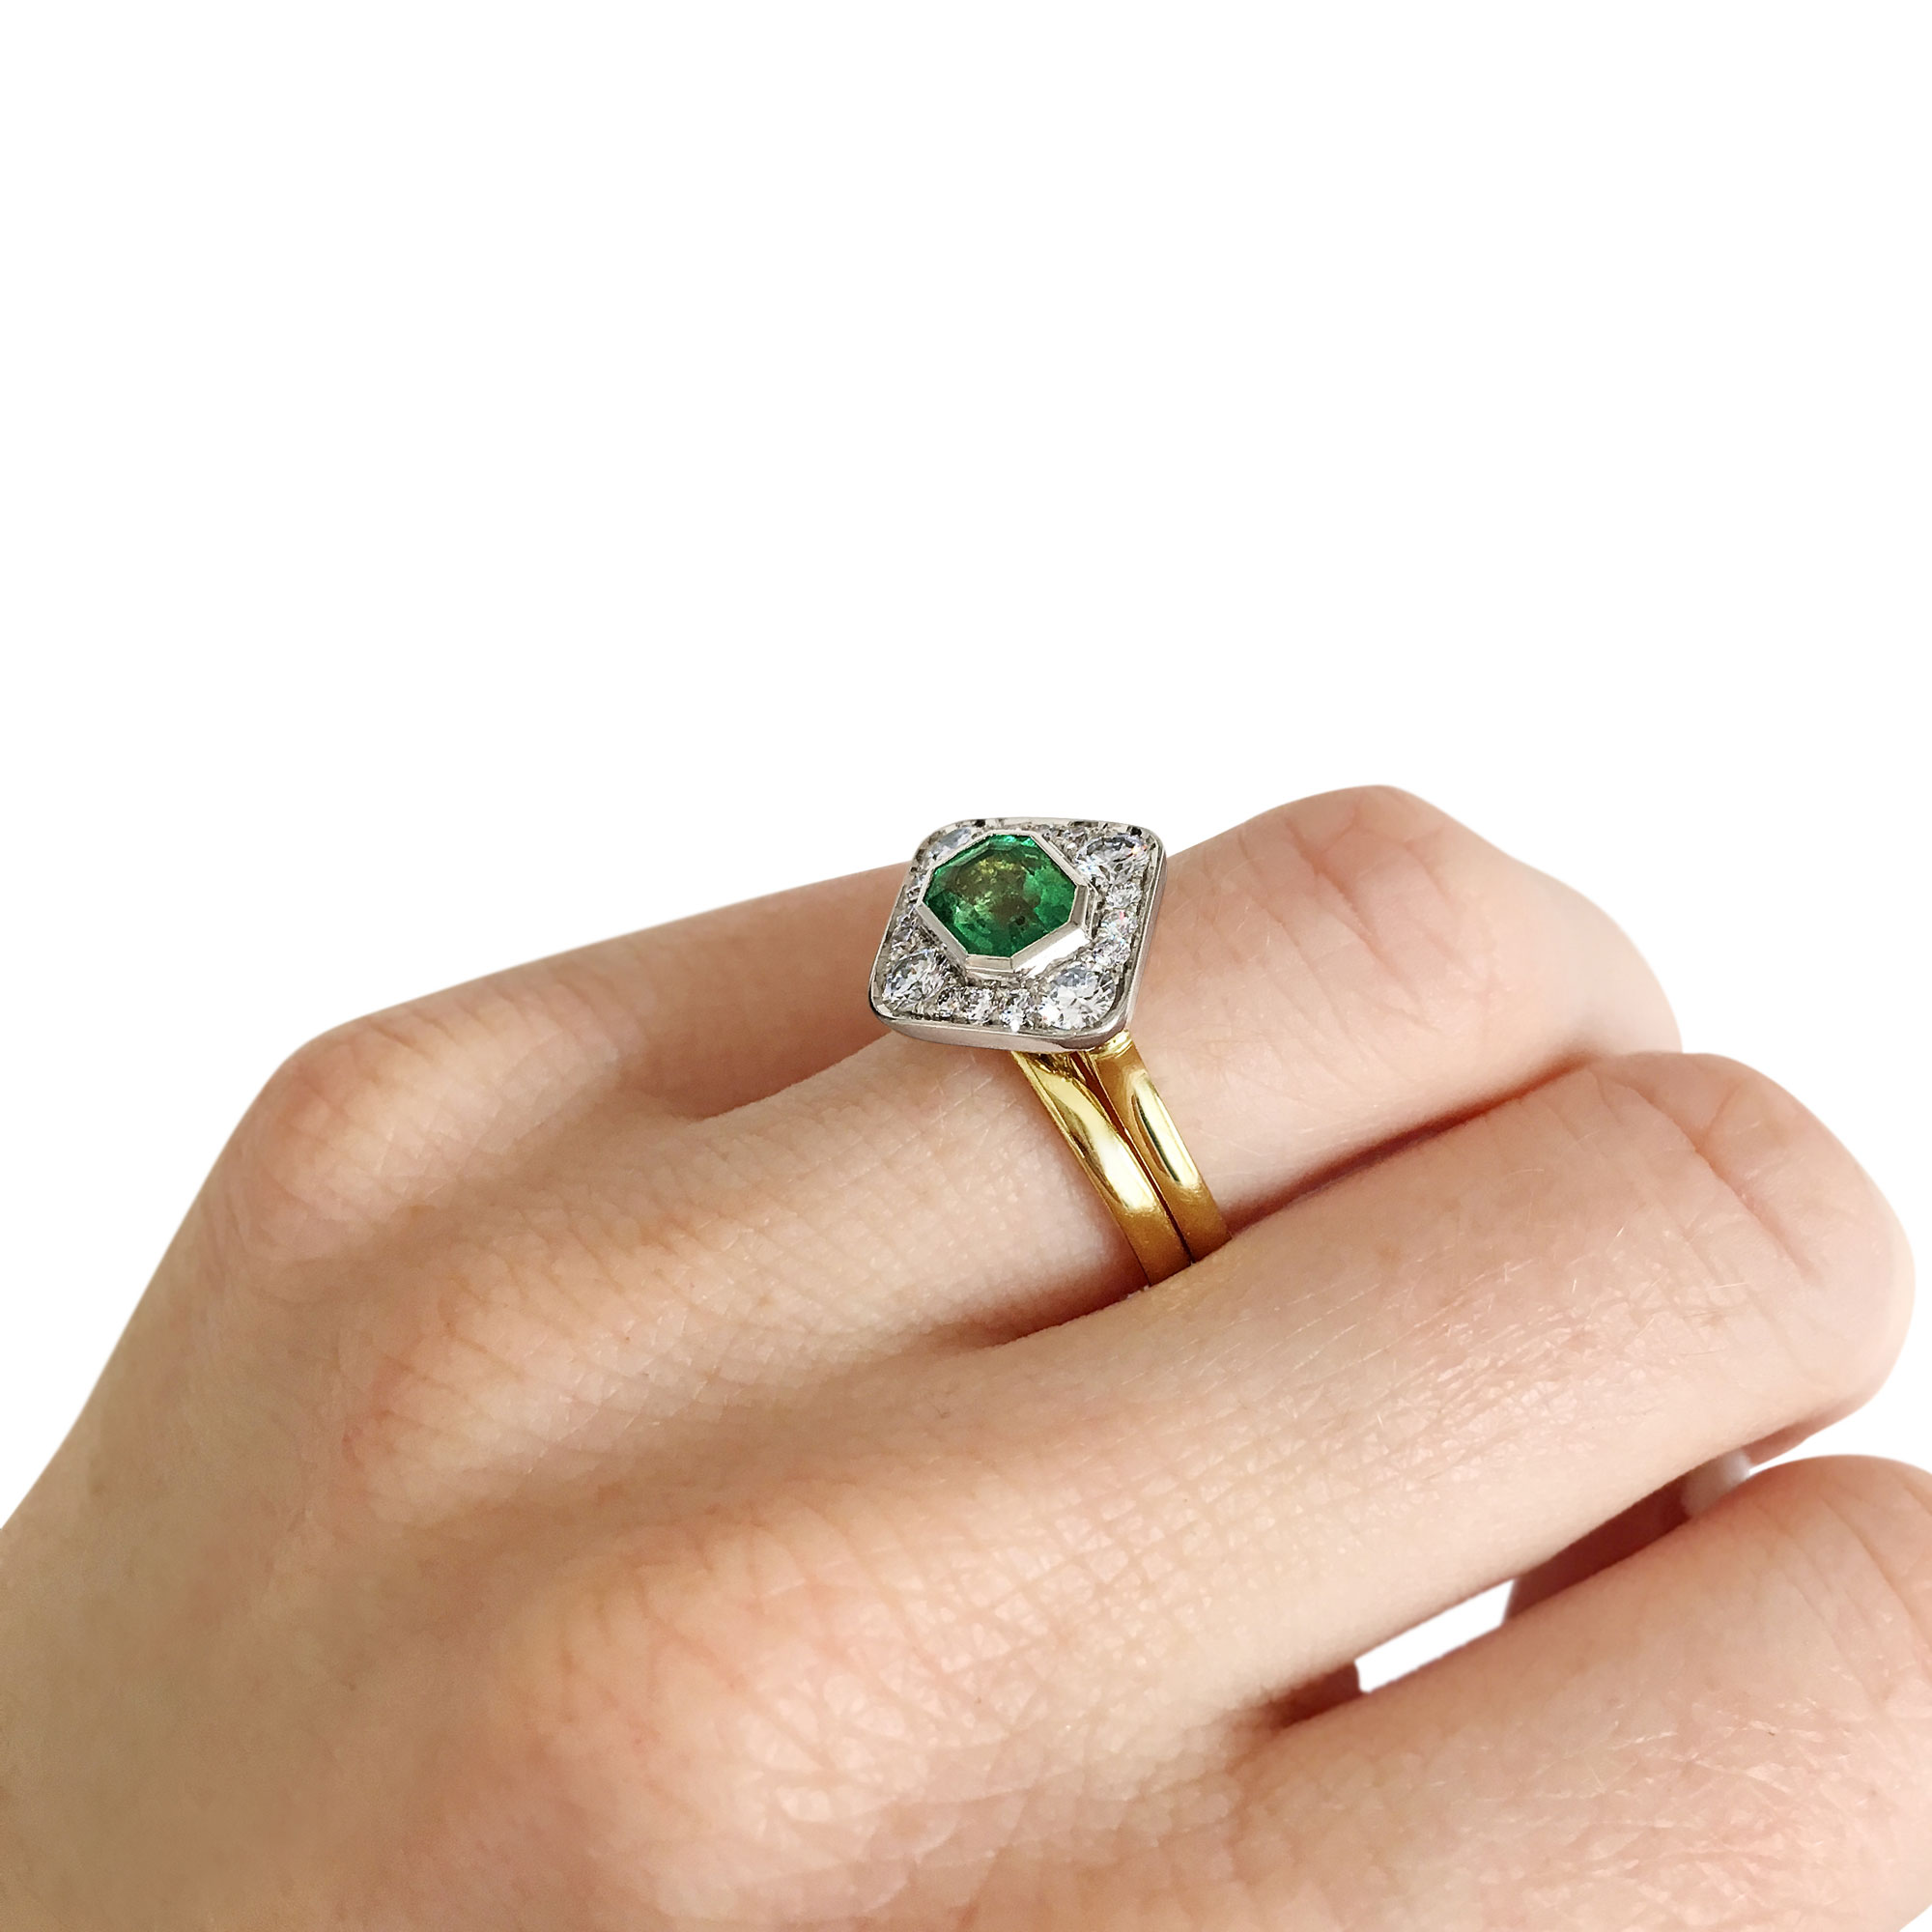 Emerald and diamond panel ring mounted in 18ct white and yellow gold on hand